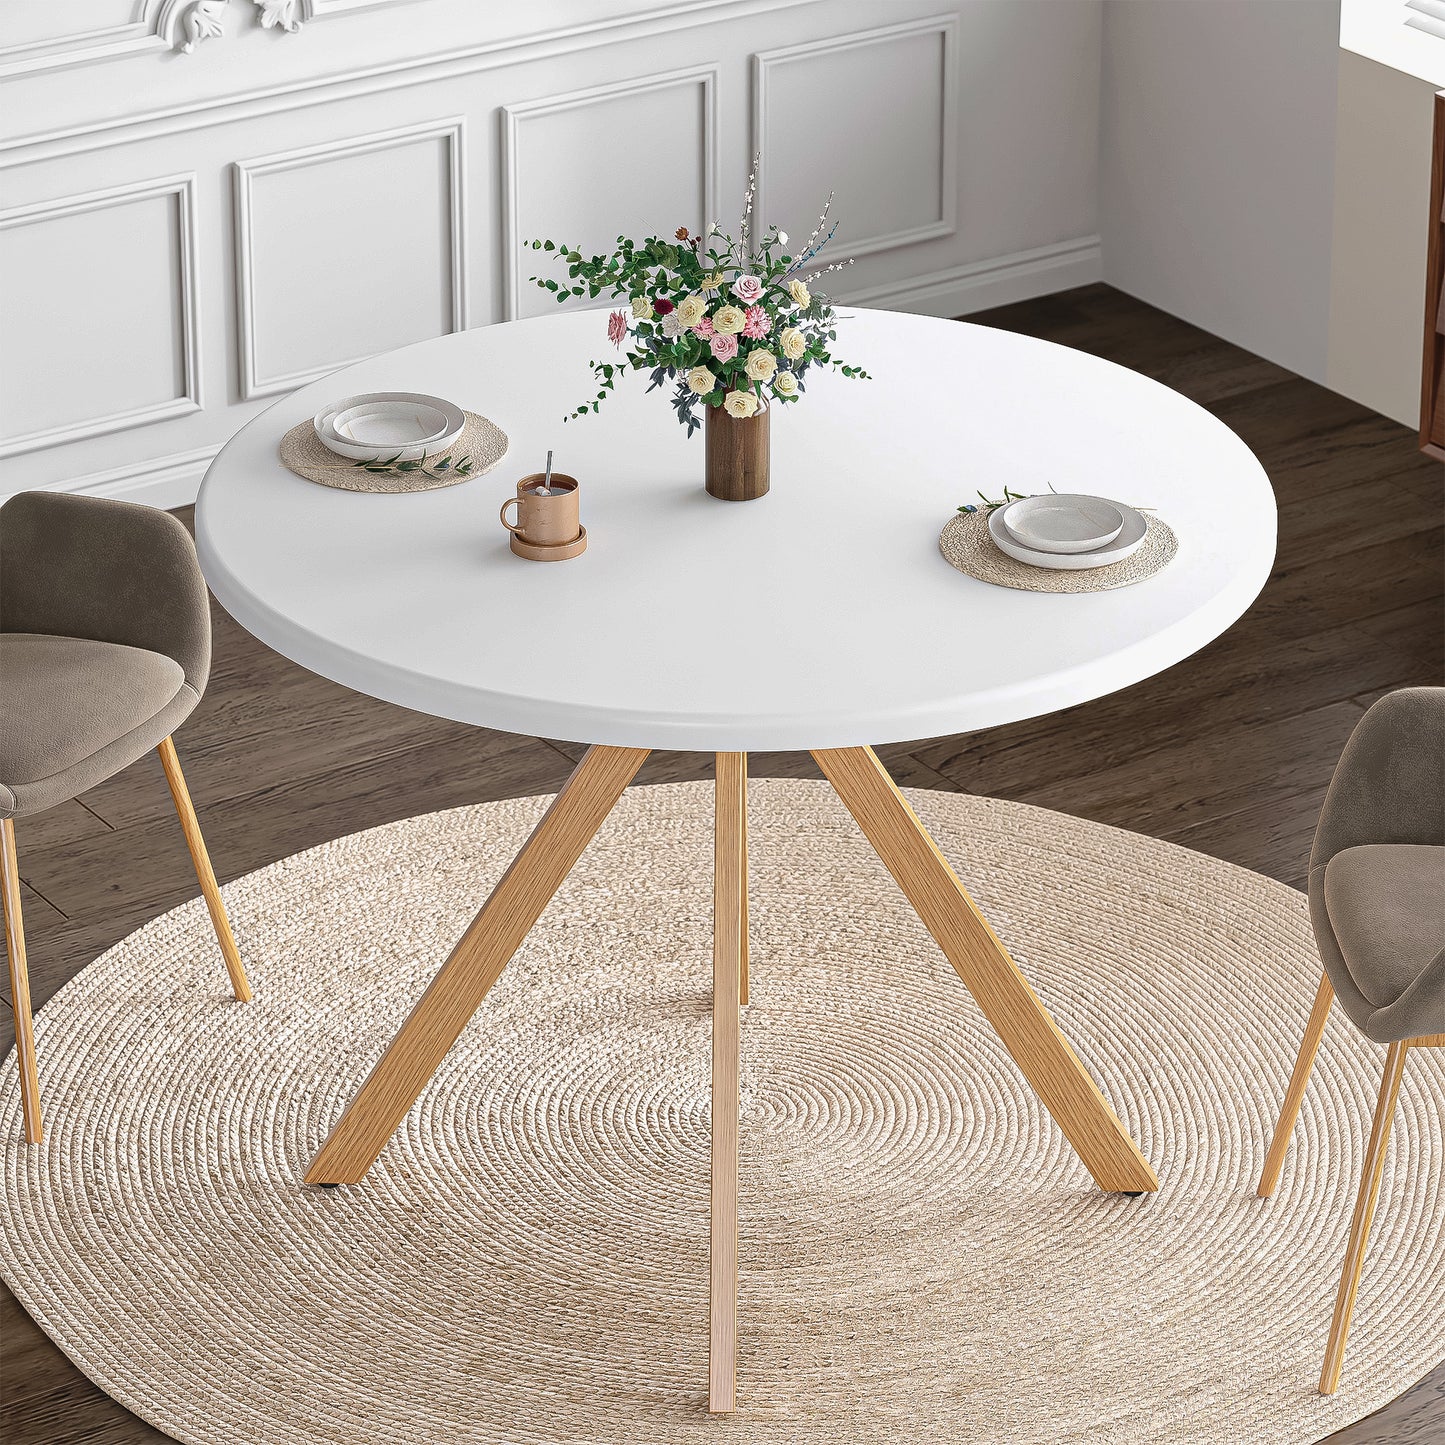 SogesPower Stylish Round Dining Table with Walnut Legs